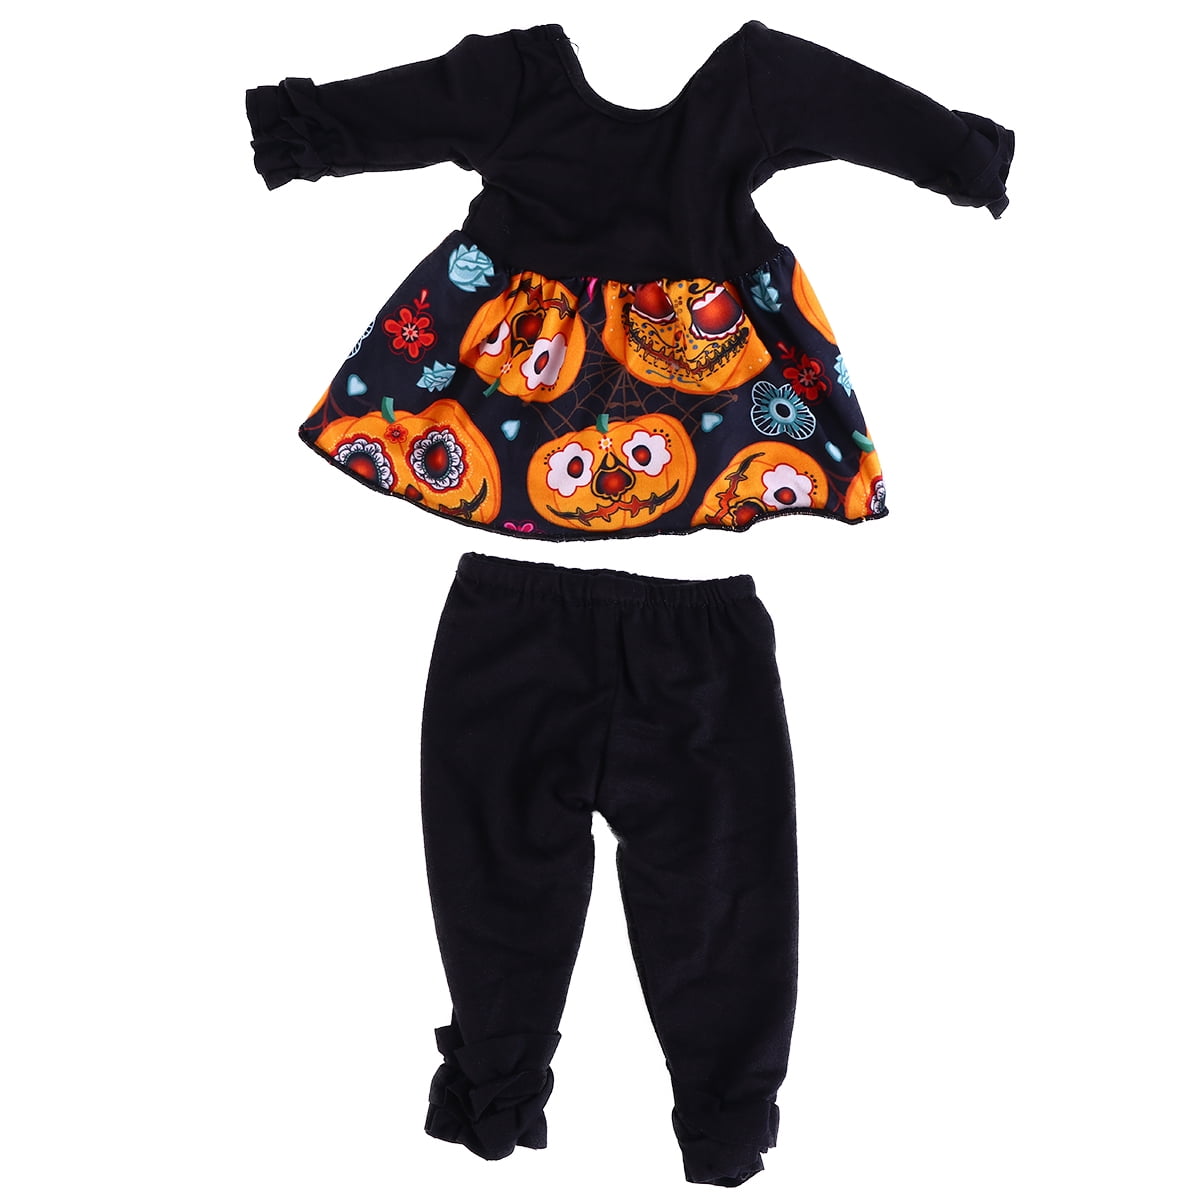  G.C 18 inch Girl Doll Clothes Pumpkin Halloween Costumes,  Sleeveless Romper Outfit with Hat Socks Pumpkin Bag Baby Doll Clothes and  Accessories for 18 inch Dolls : Toys & Games